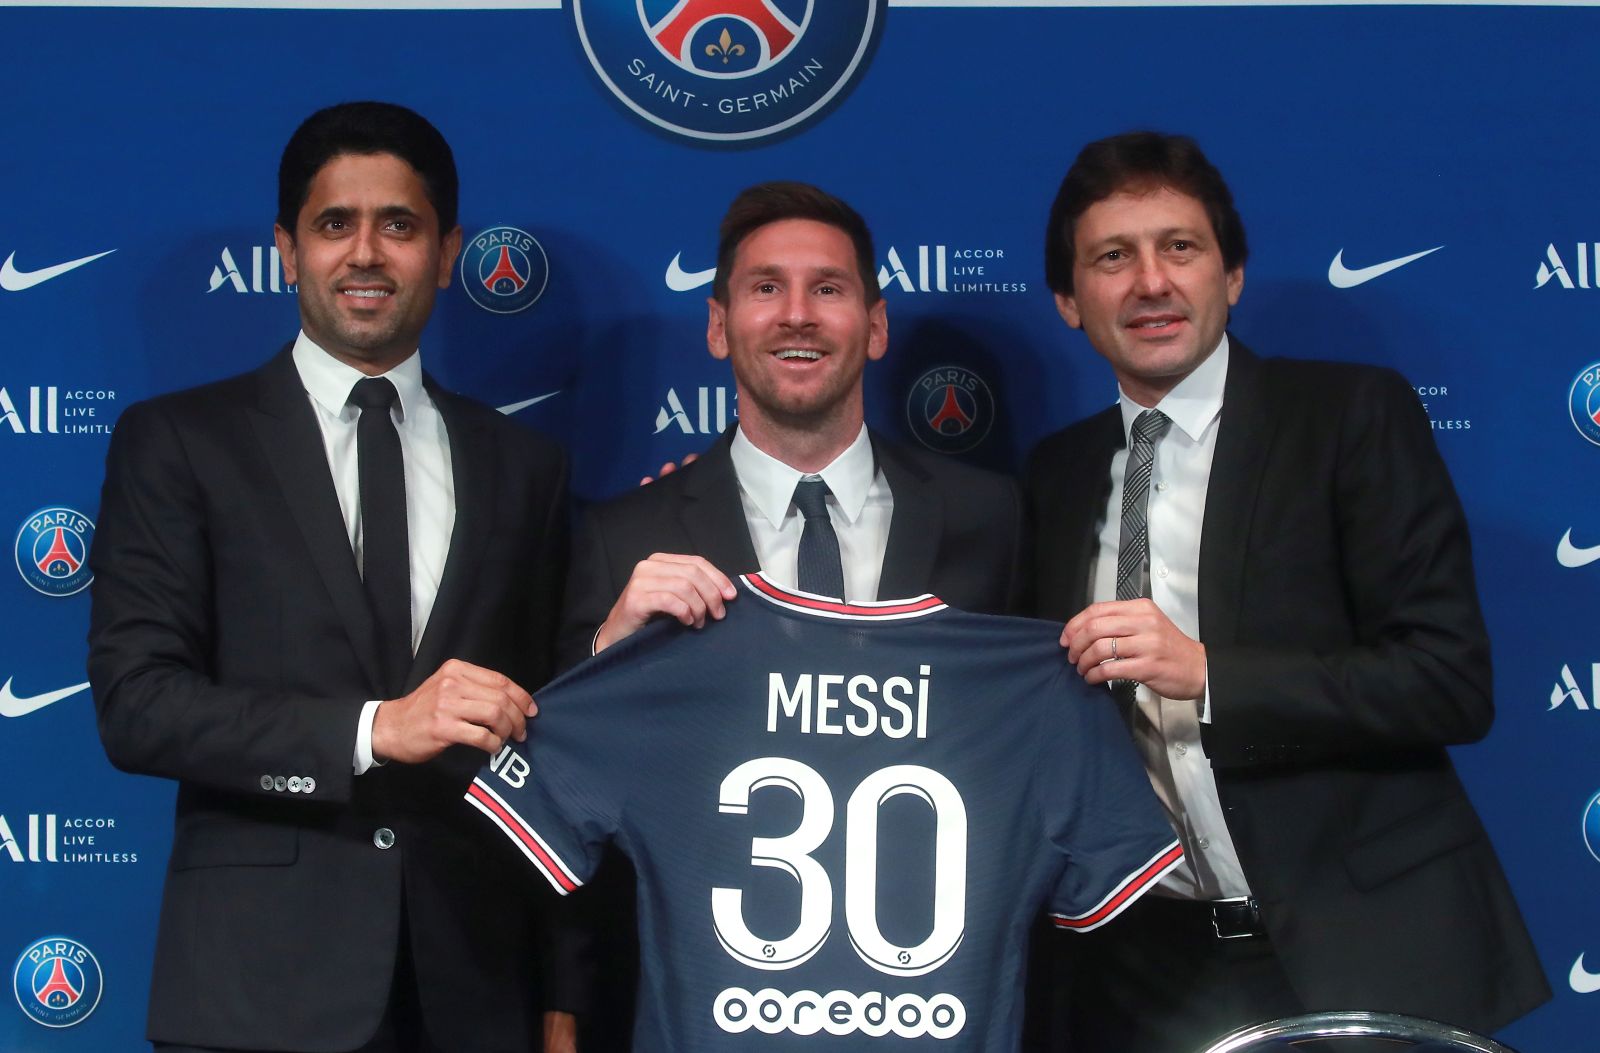 epa09409490 Paris Saint-Germain's president Nasser Al-Khelaifi (L), sports director Leonardo (R) and Argentinian striker Lionel Messi (C) pose with his new PSG jersey after his press conference as part of his official presentation at the Parc des Princes stadium, in Paris, France, 11 August 2021. Messi arrived in Paris on 09 August and signed a contract with French soccer club Paris Saint-Germain.  EPA/CHRISTOPHE PETIT TESSON